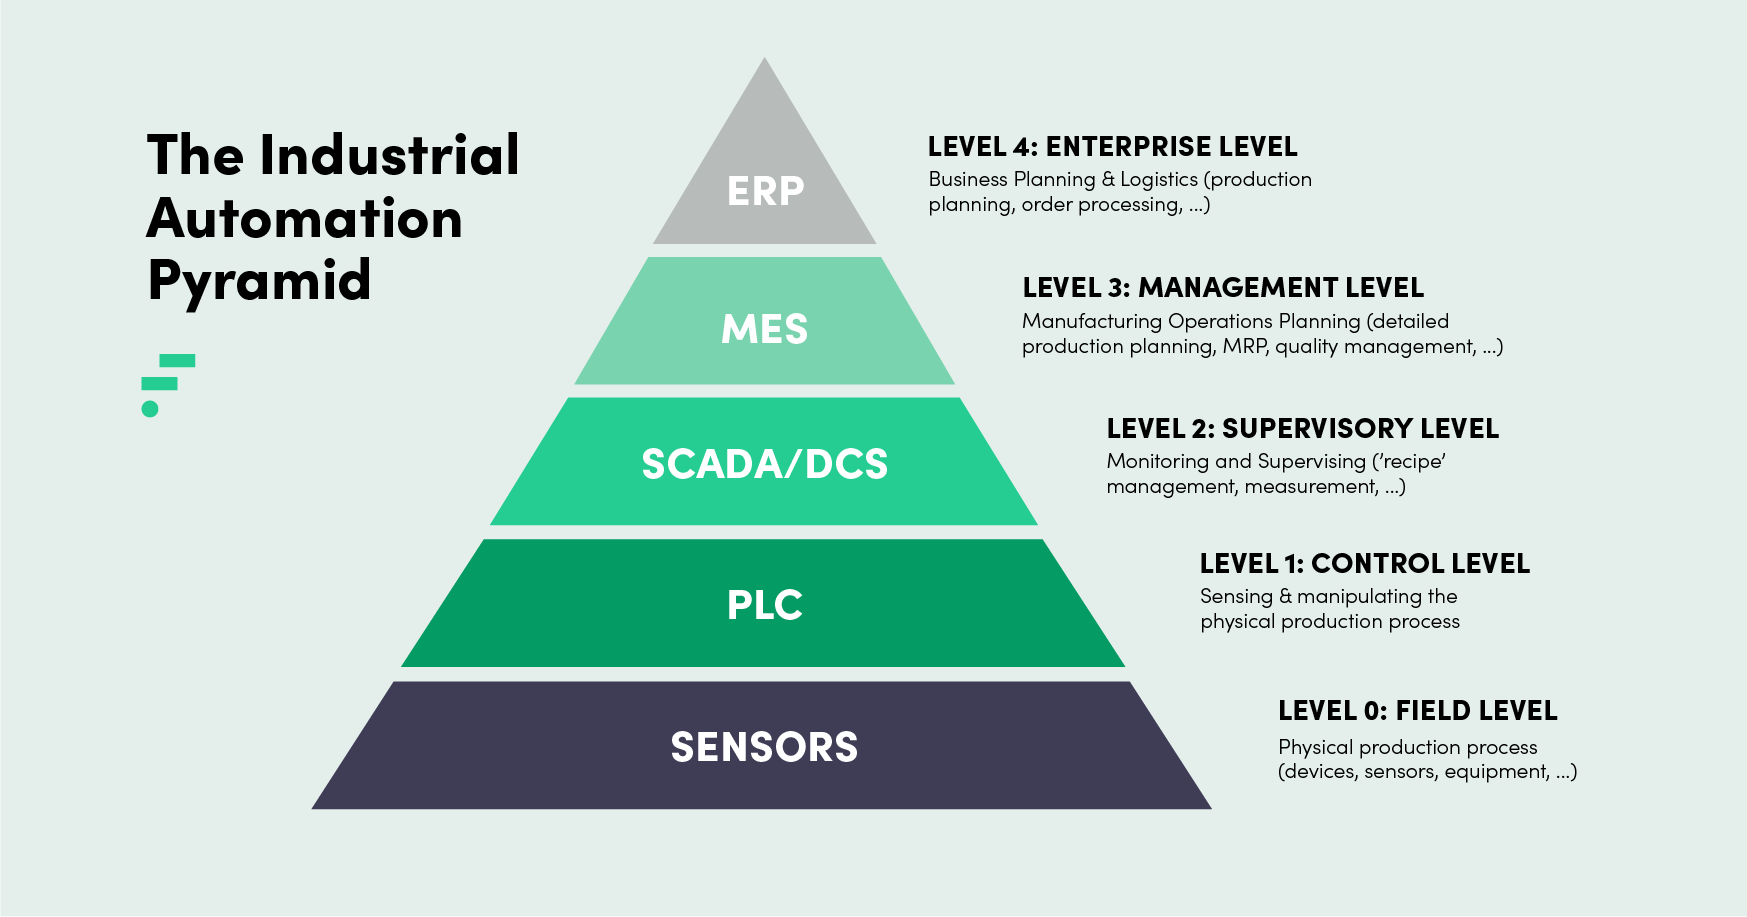 While ERP is on Level 4, MES is on Level 3 of the Industrial Automation Pyramid